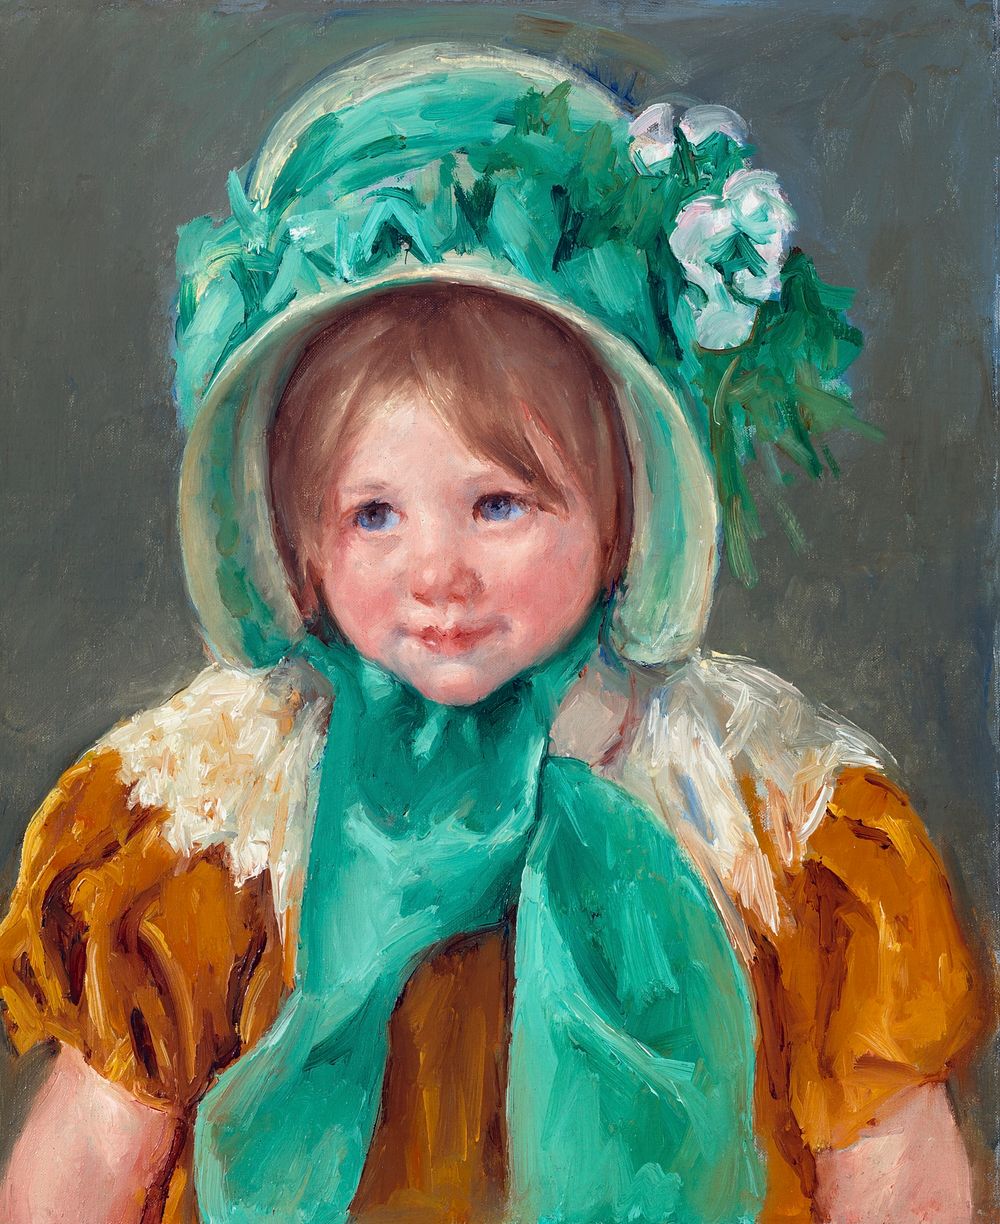 Sara in a Green Bonnet (ca. 1901) painting in high resolutionby Mary Cassatt. Original from Smithsonian Institution.…